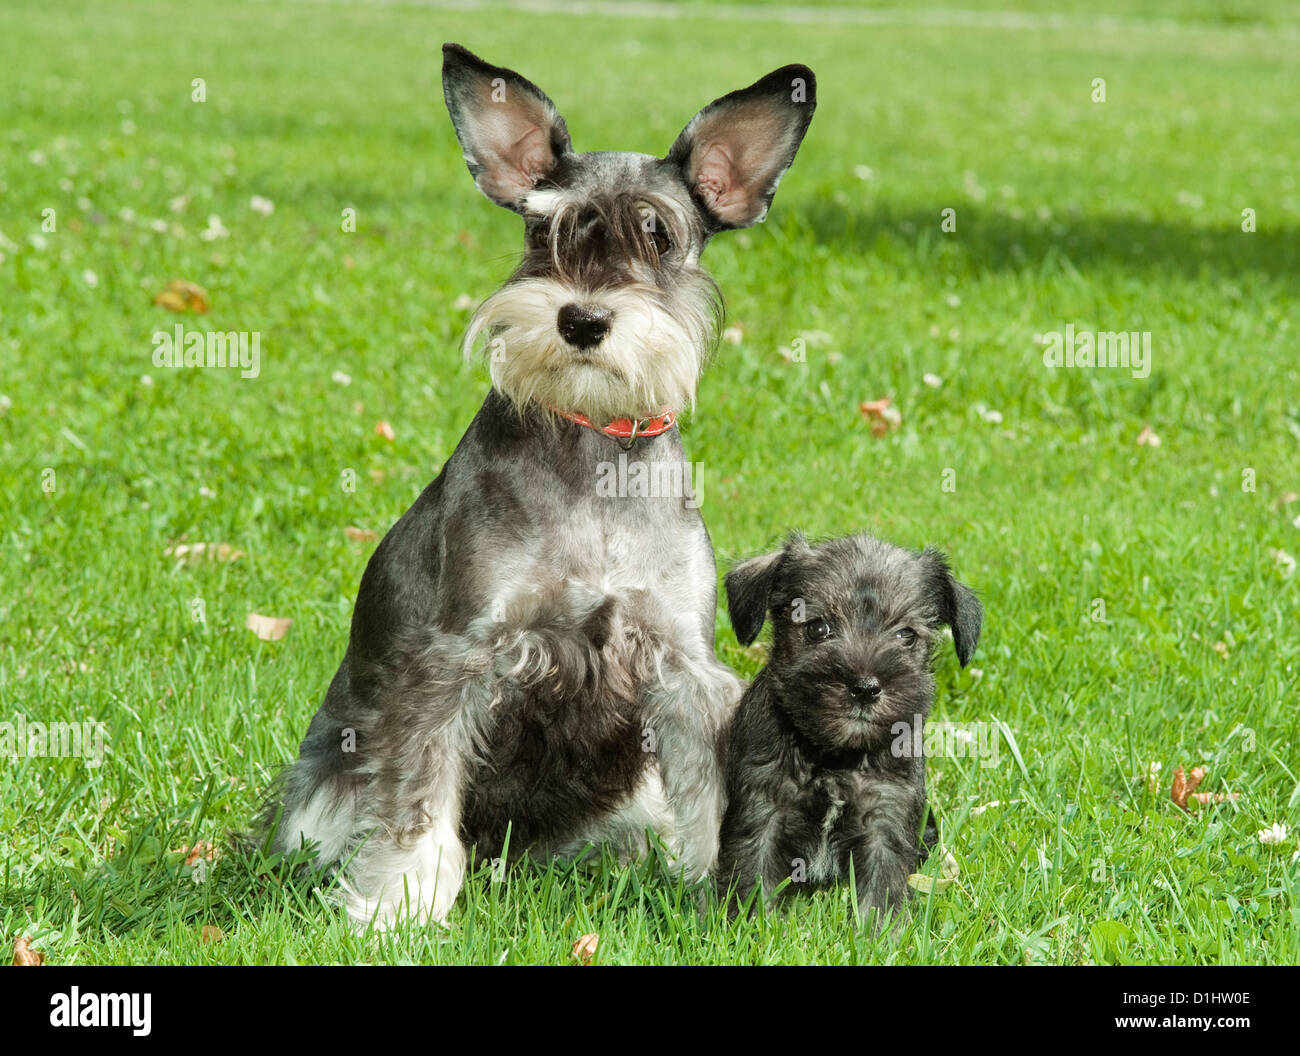 Schnauzer High Resolution Stock Photography and Images - Alamy